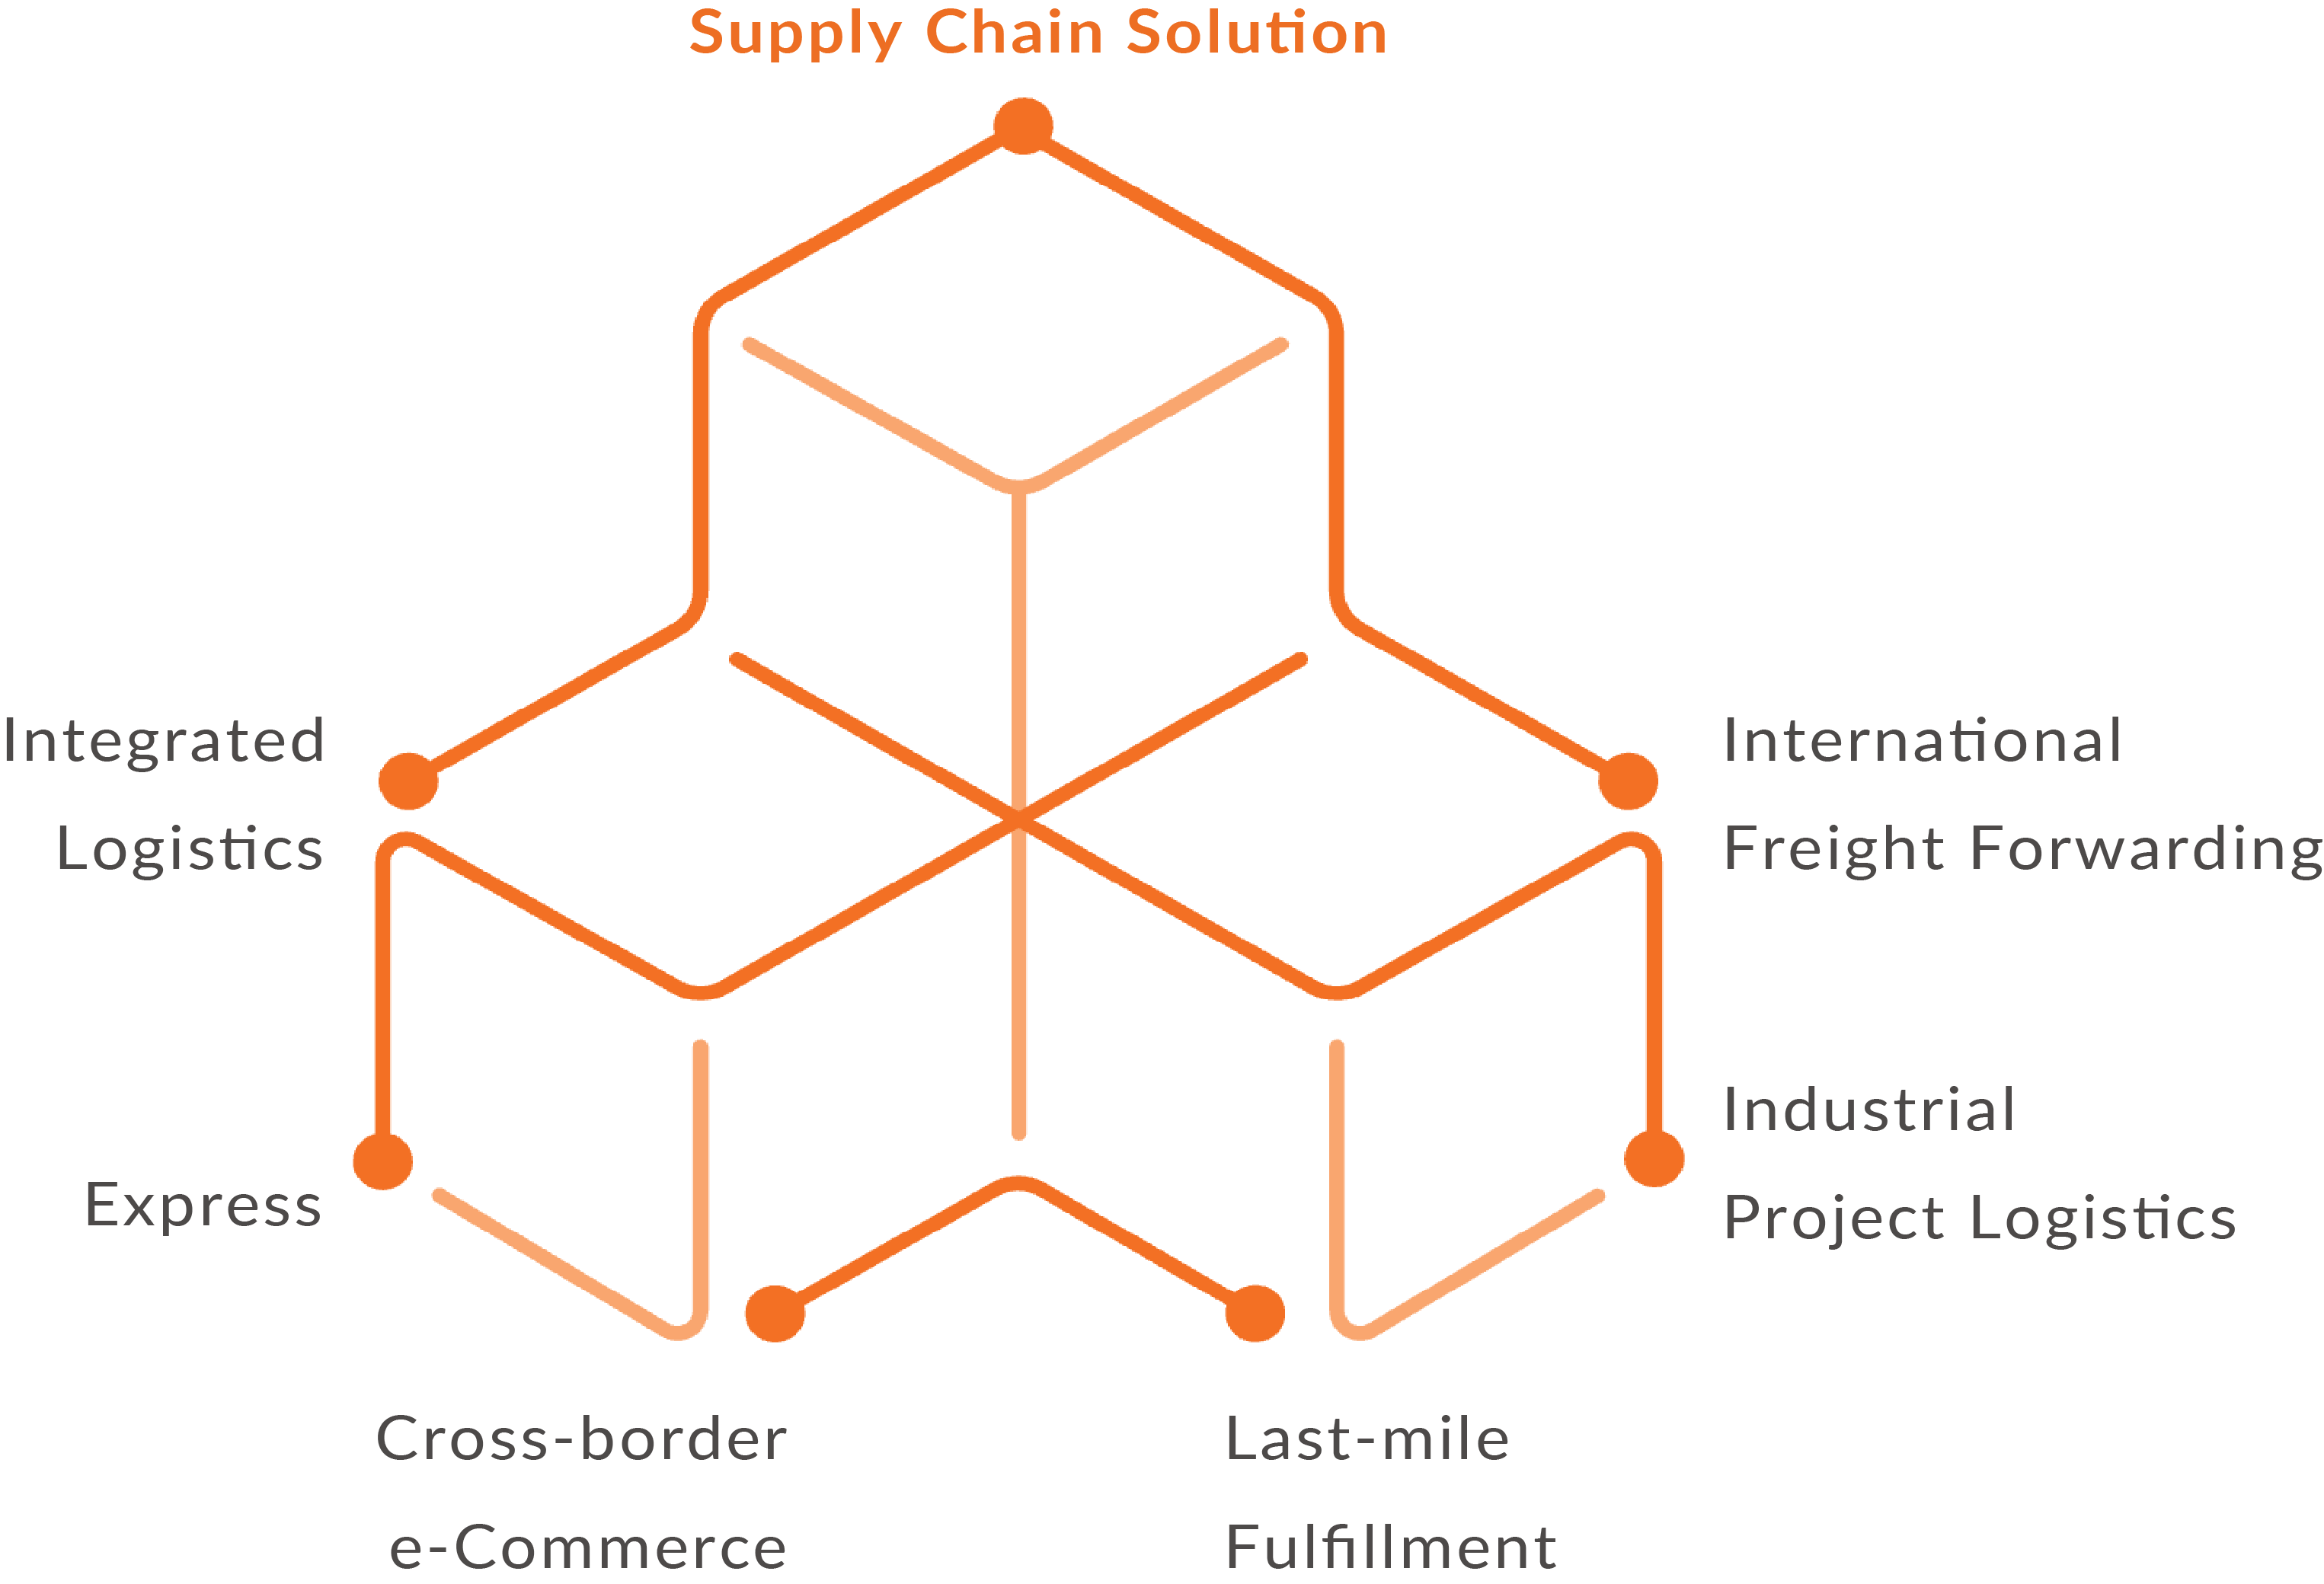 Supply chain solution